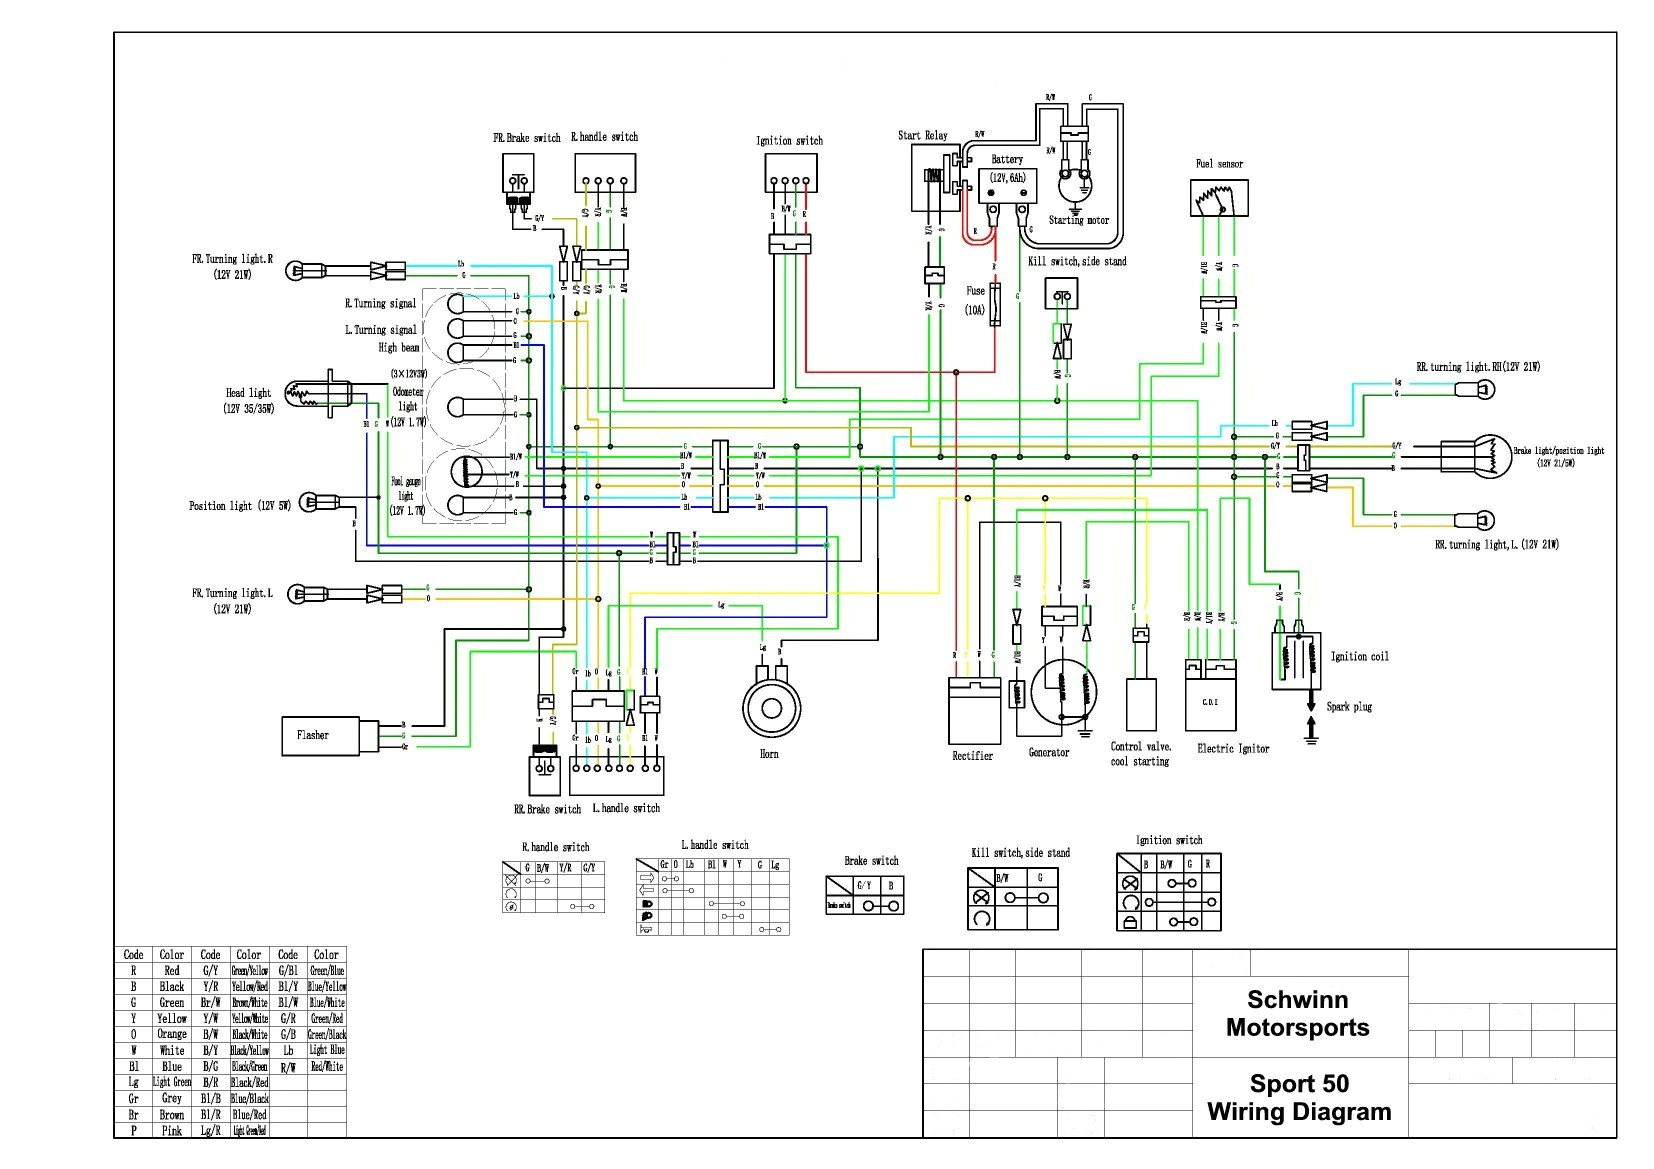 picture wiring diagram for electric scooter scooter wiring diagram wiring diagram razor electric scooter schematics mobility